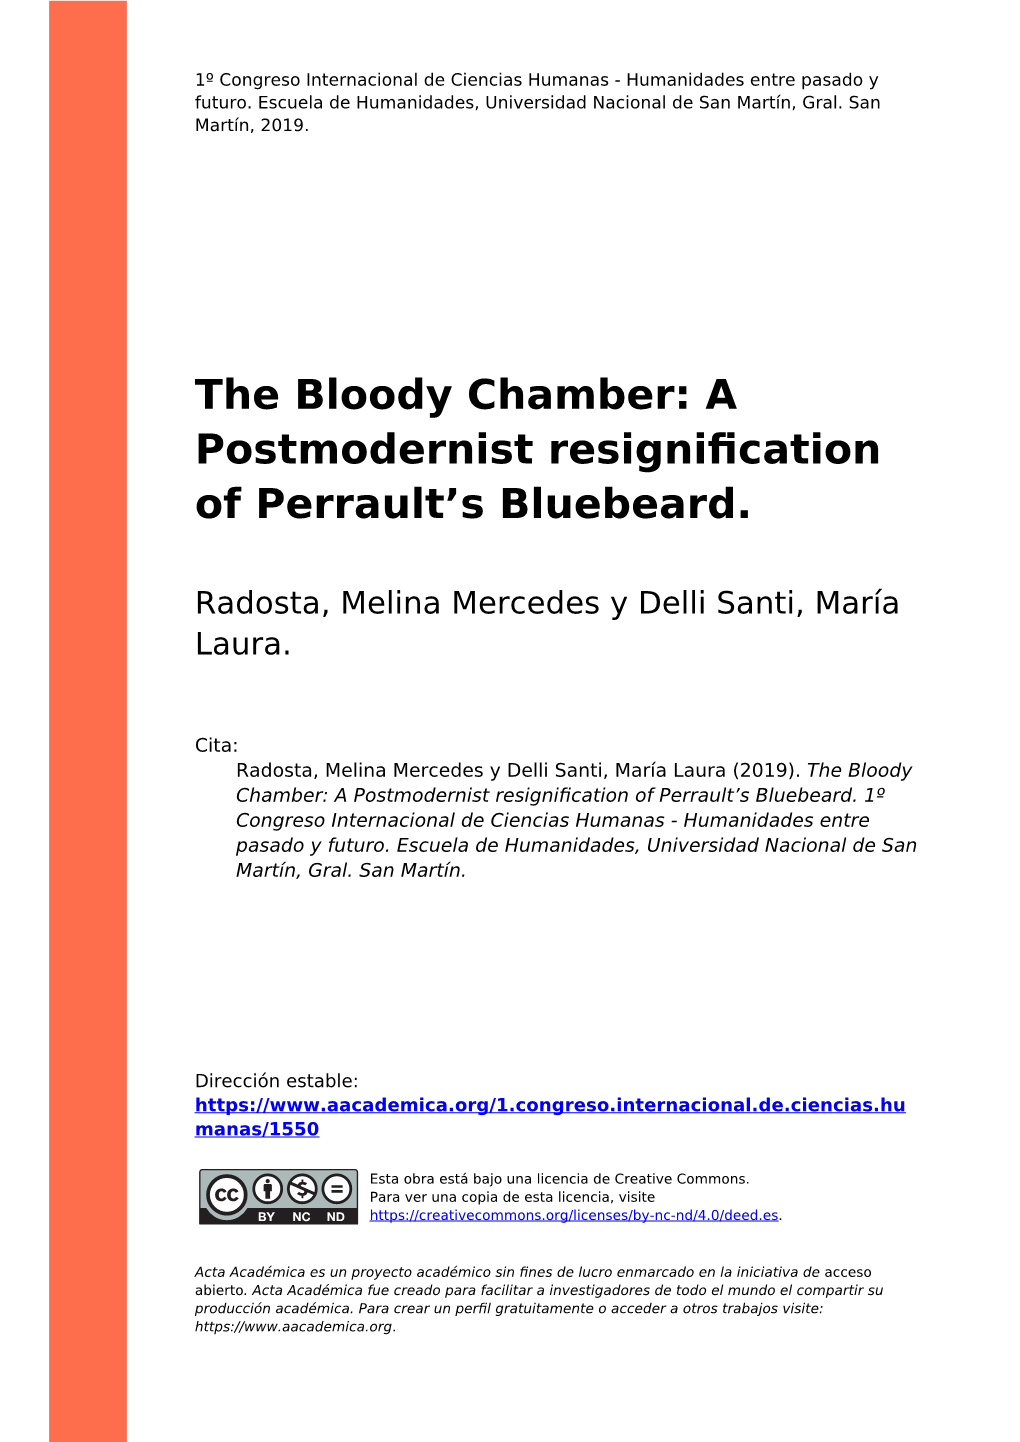 The Bloody Chamber: a Postmodernist Resignification of Perrault’S Bluebeard 1